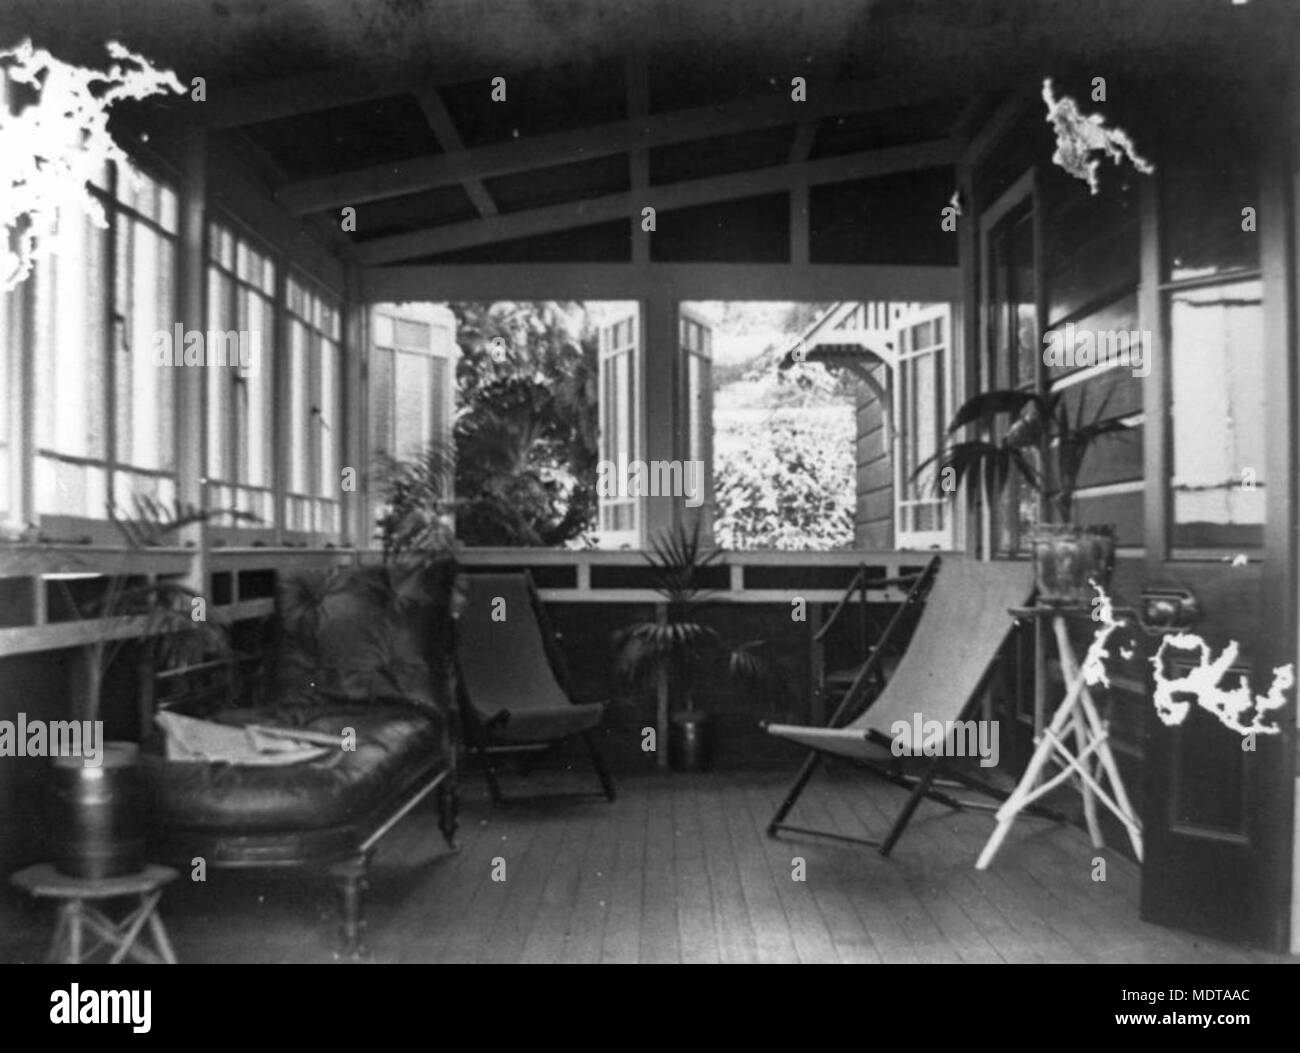 Furnishings on a verandah of a Queensland home, ca 1925. Description: A covered verandah with open windows, furnished with deck chairs, a chaise lounge and pot plants. Stock Photo